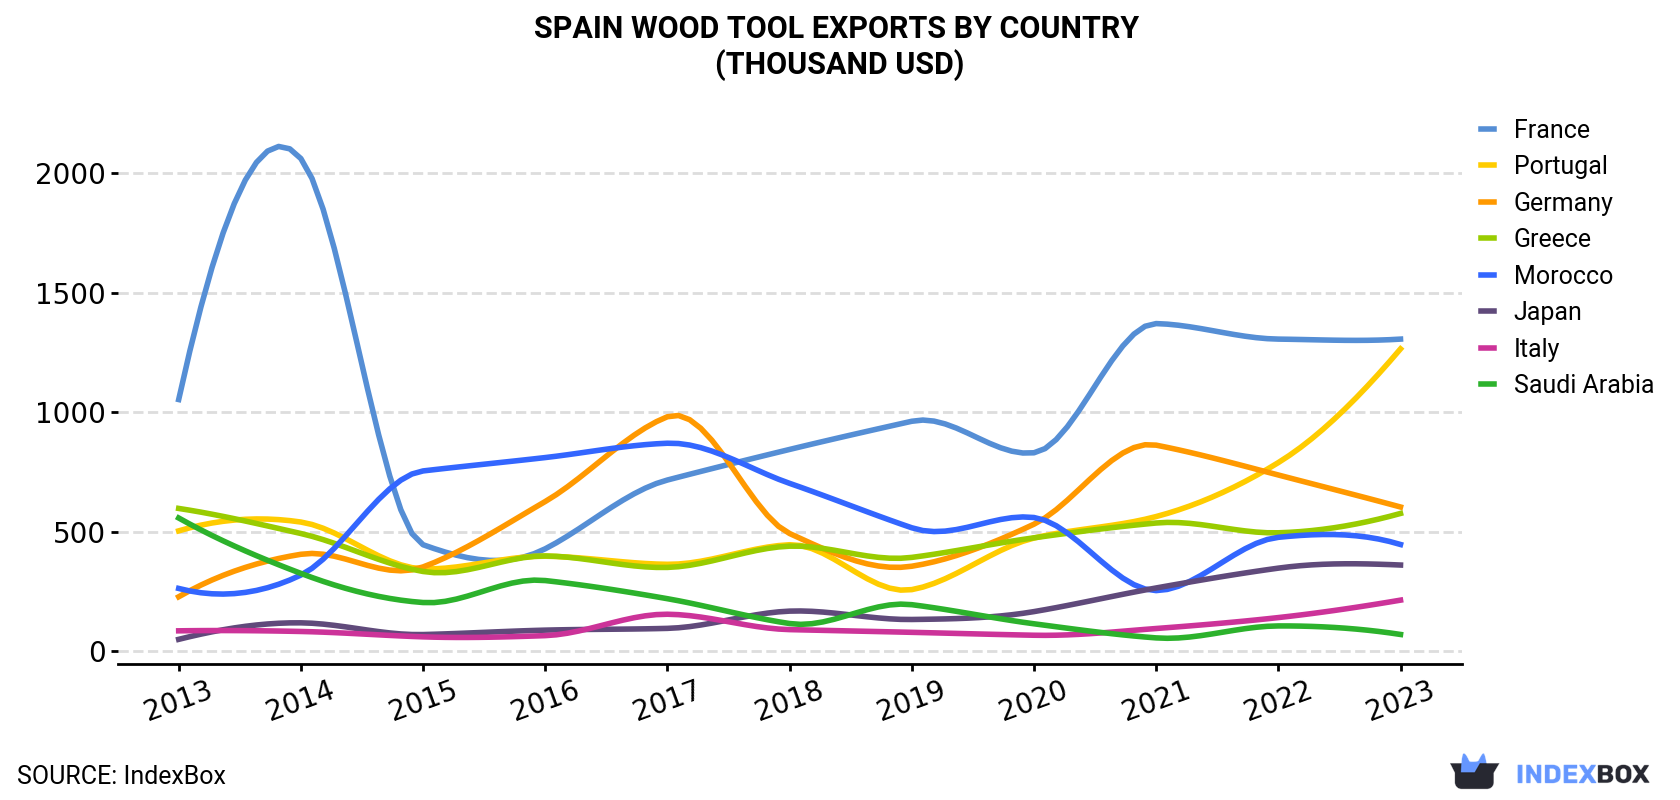 Spain Wood Tool Exports By Country (Thousand USD)